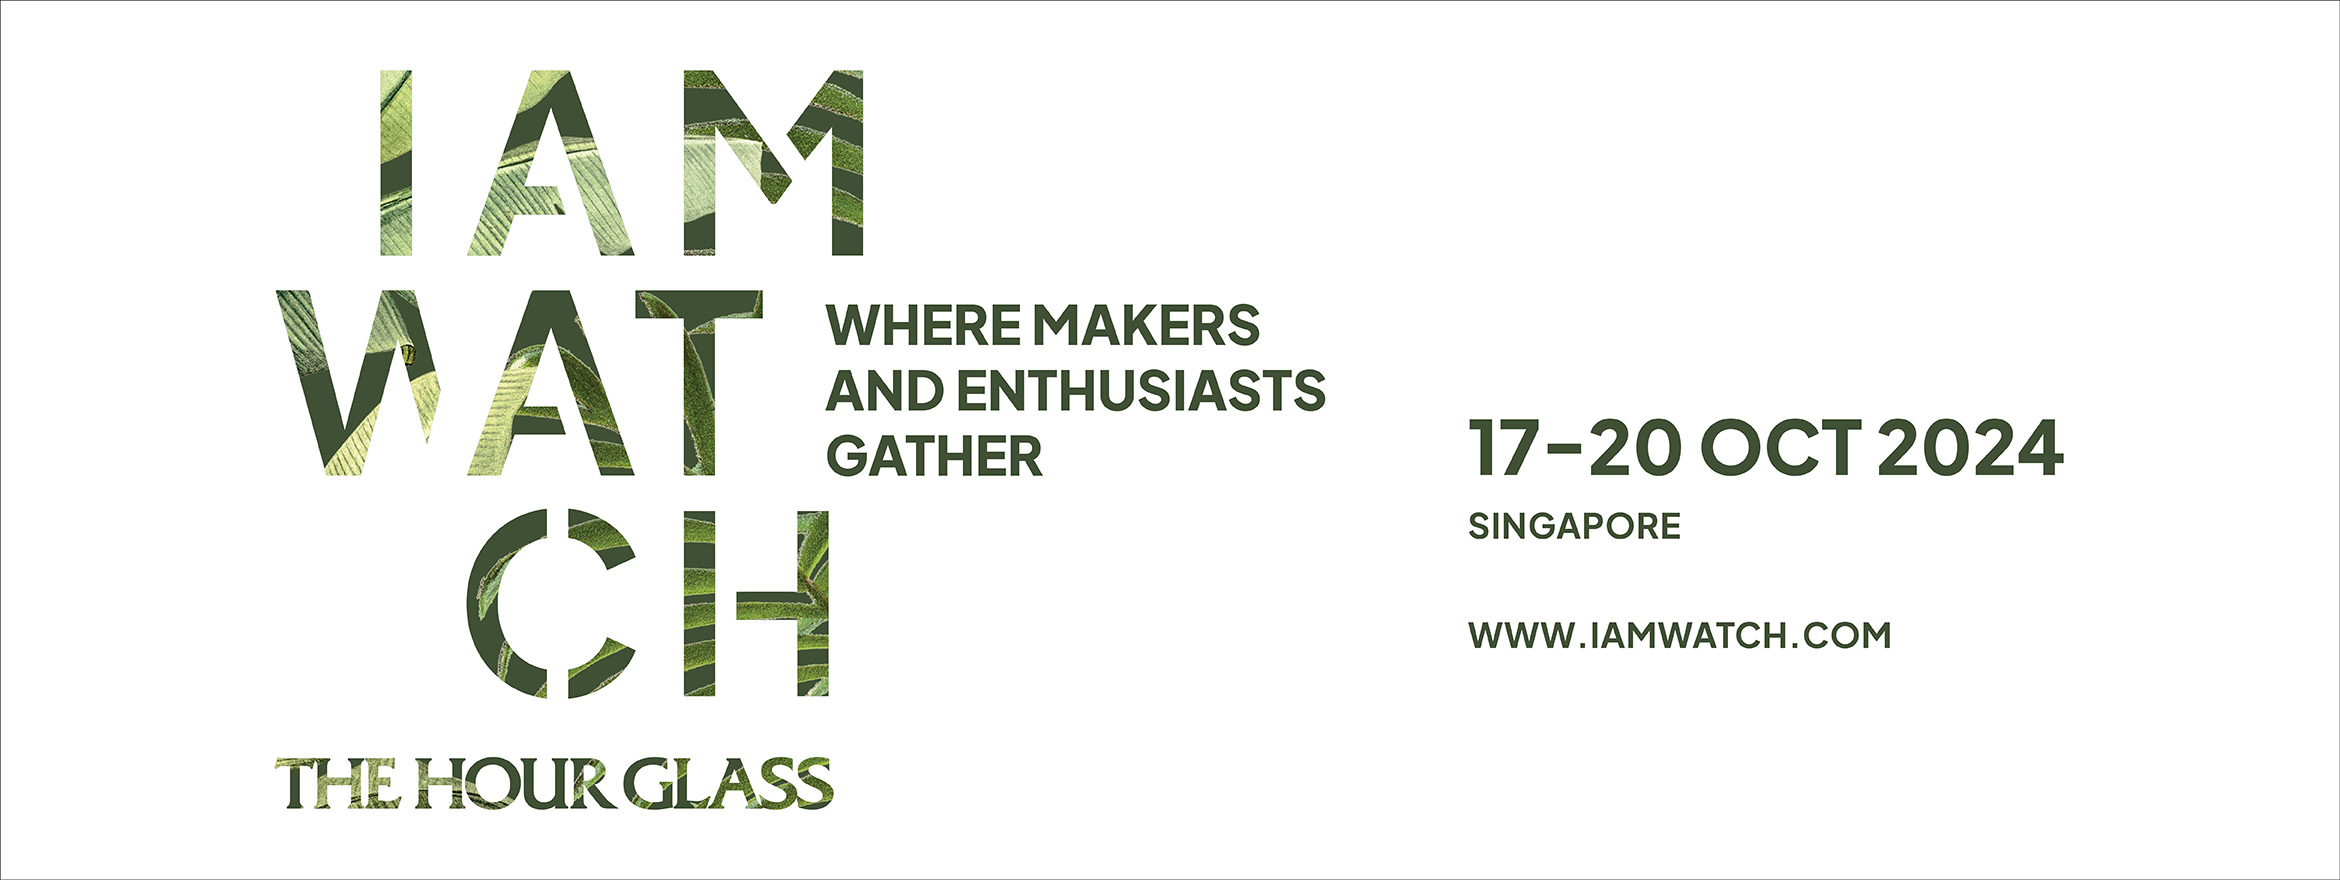 IAMWATCH – WHERE MAKERS AND ENTHUSIASTS GATHER